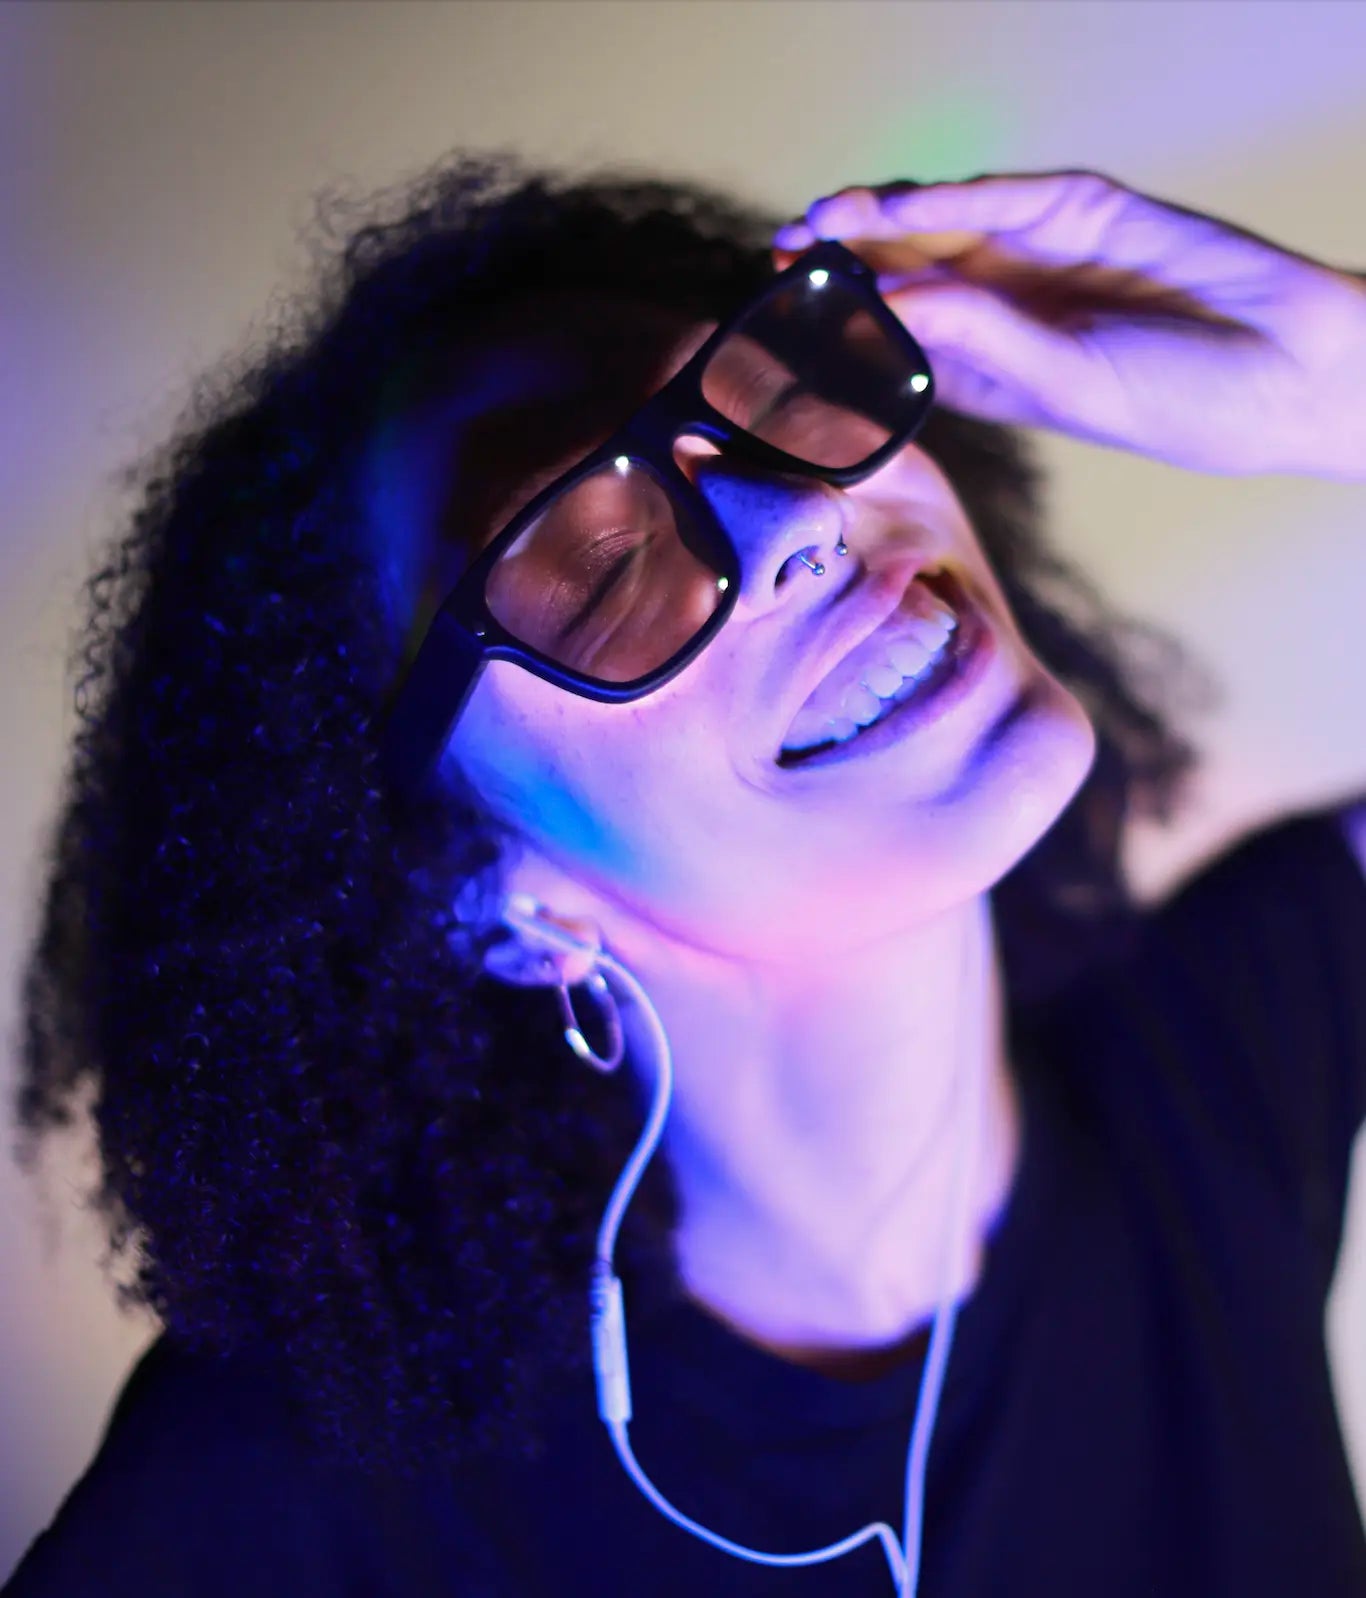 Woman smiling while wearing Healyan Glasses and wired headphones